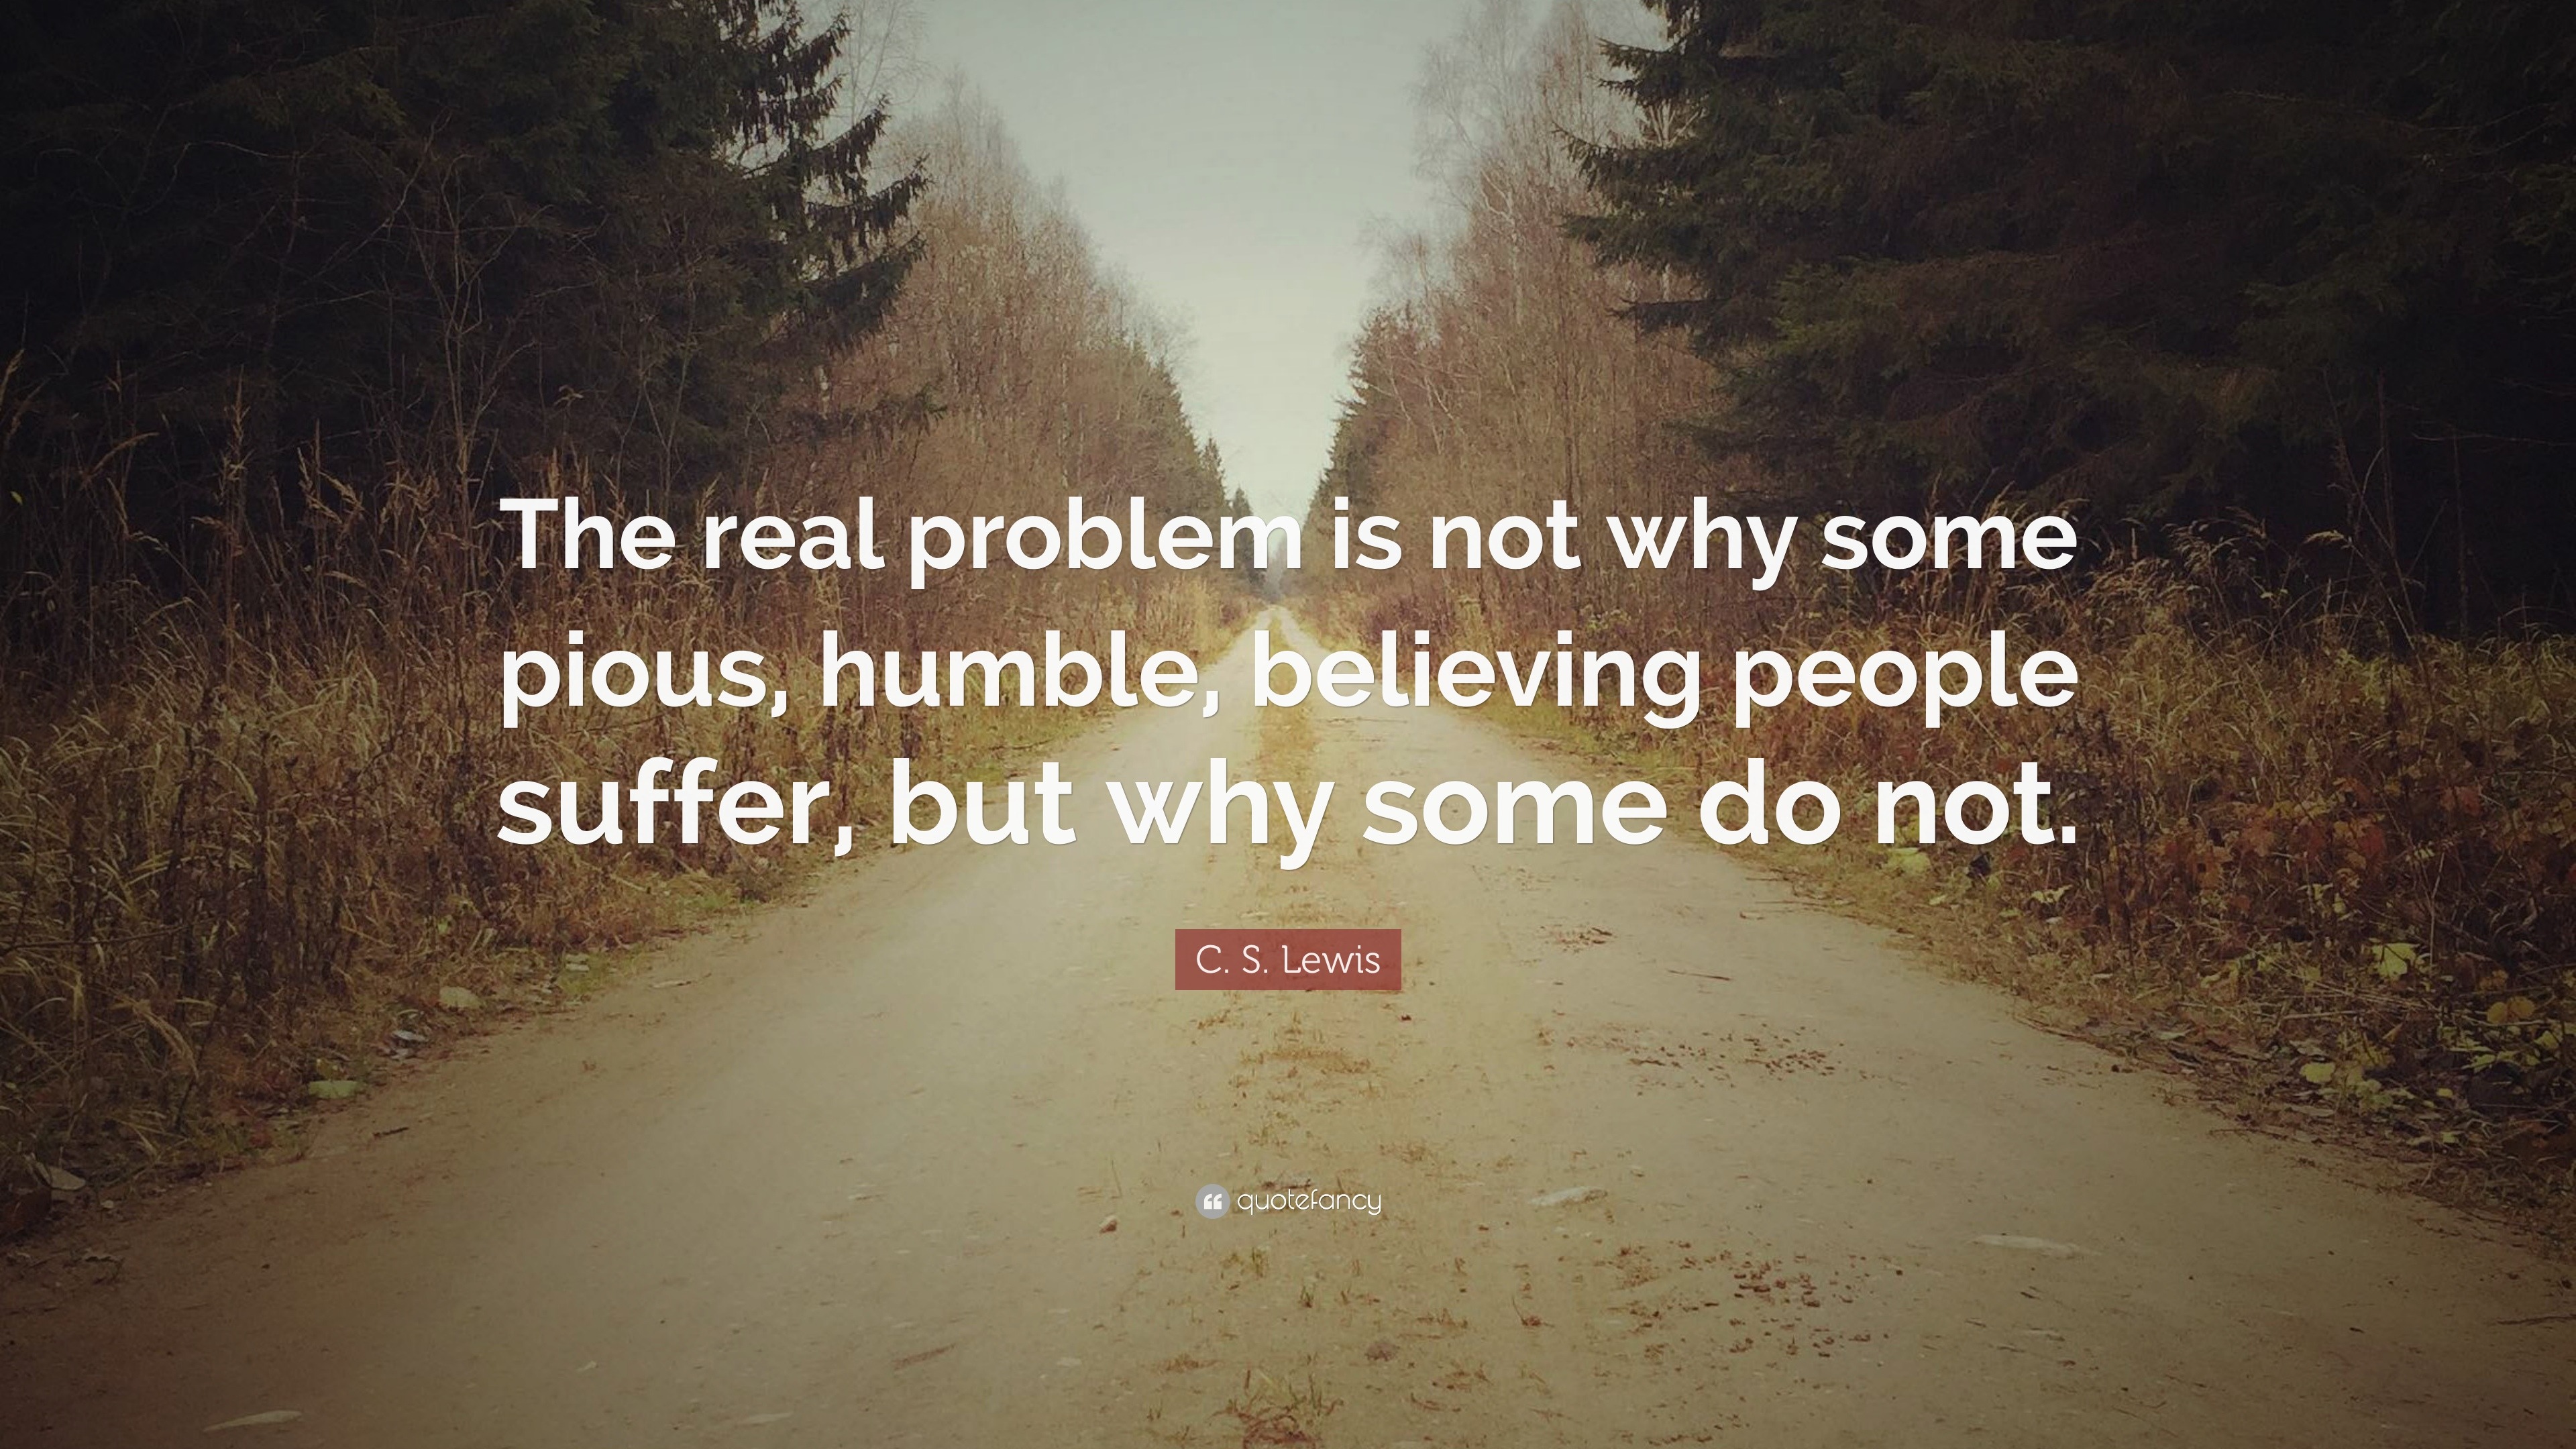 C. S. Lewis Quote: “The real problem is not why some pious, humble ...